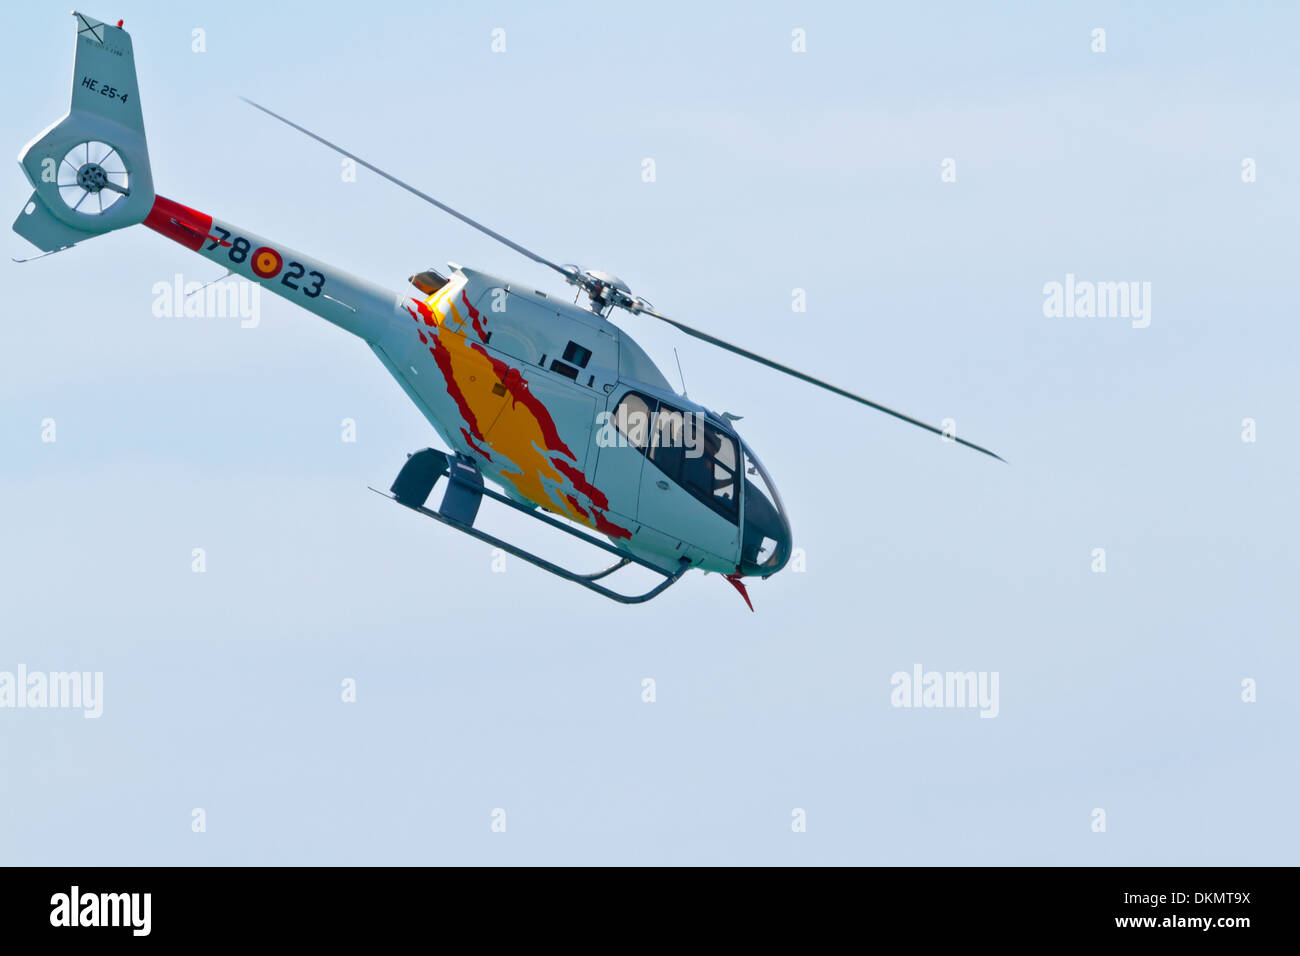 Helicopters of the Patrulla Aspa taking part in an exhibition on the 4th airshow of Cadiz Stock Photo